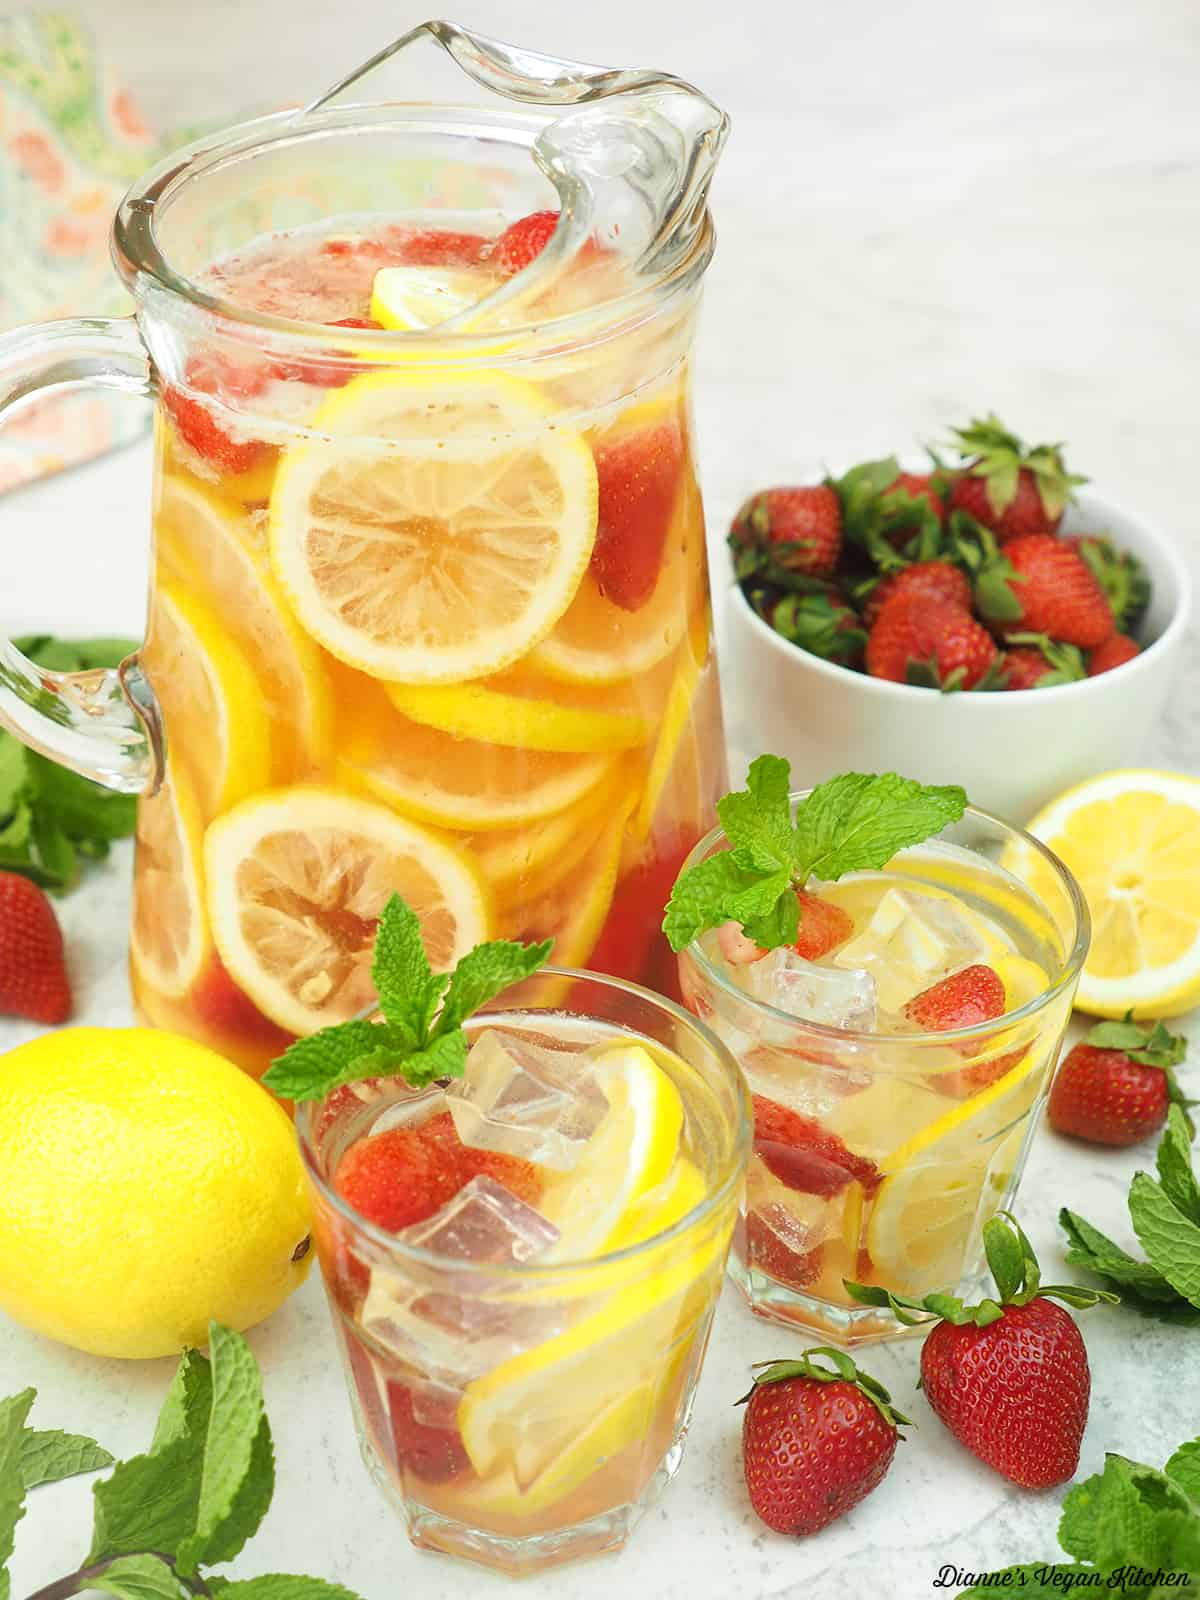 two glasses of white wine sangria with pitcher, lemon, and strawberries